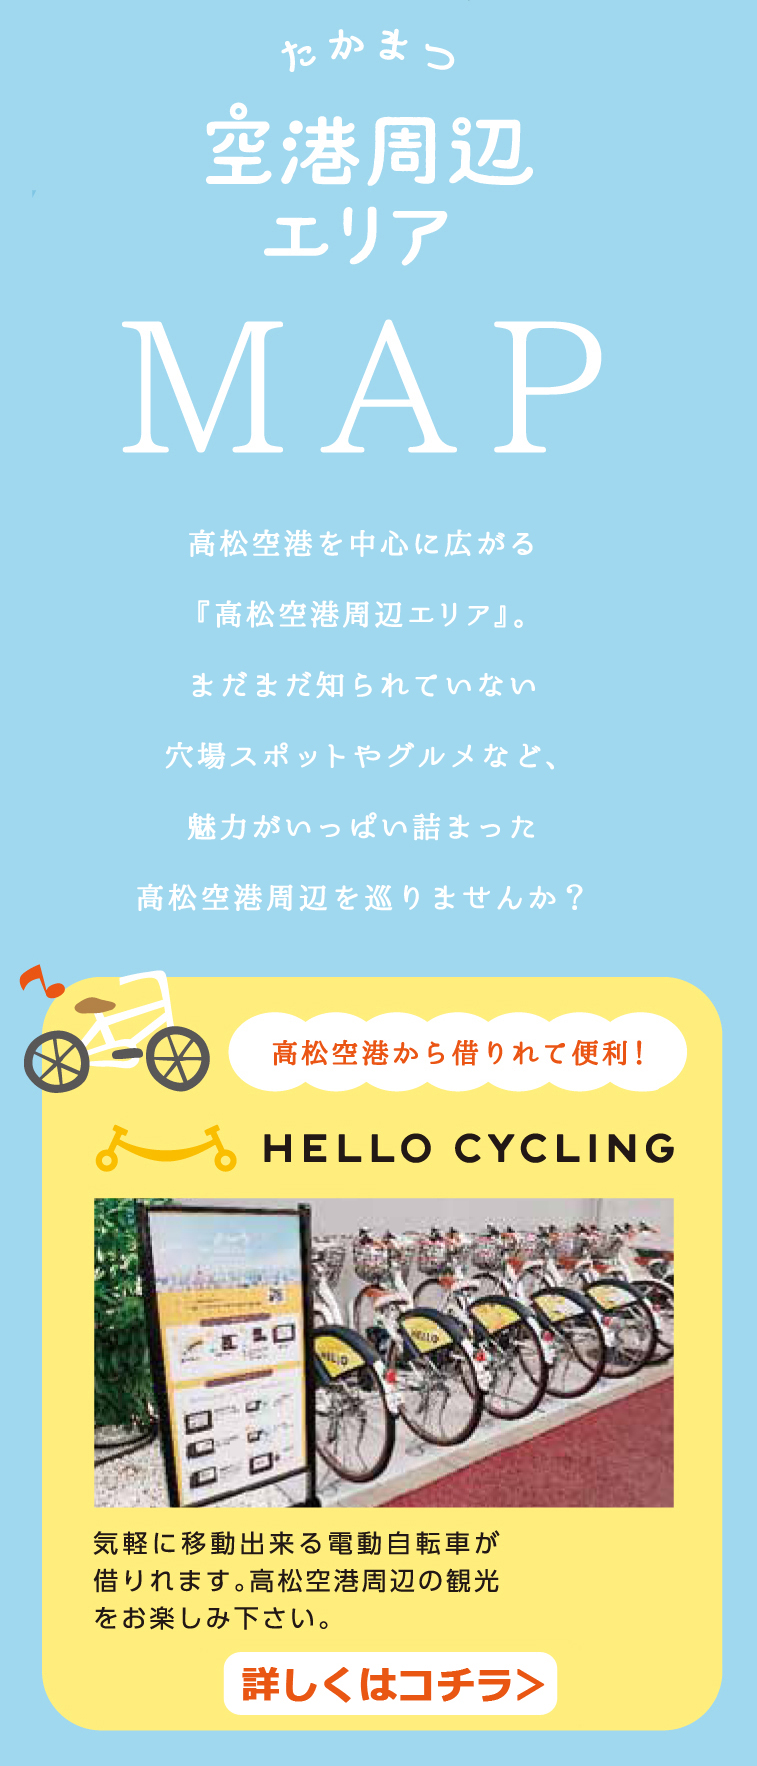 hellocycling